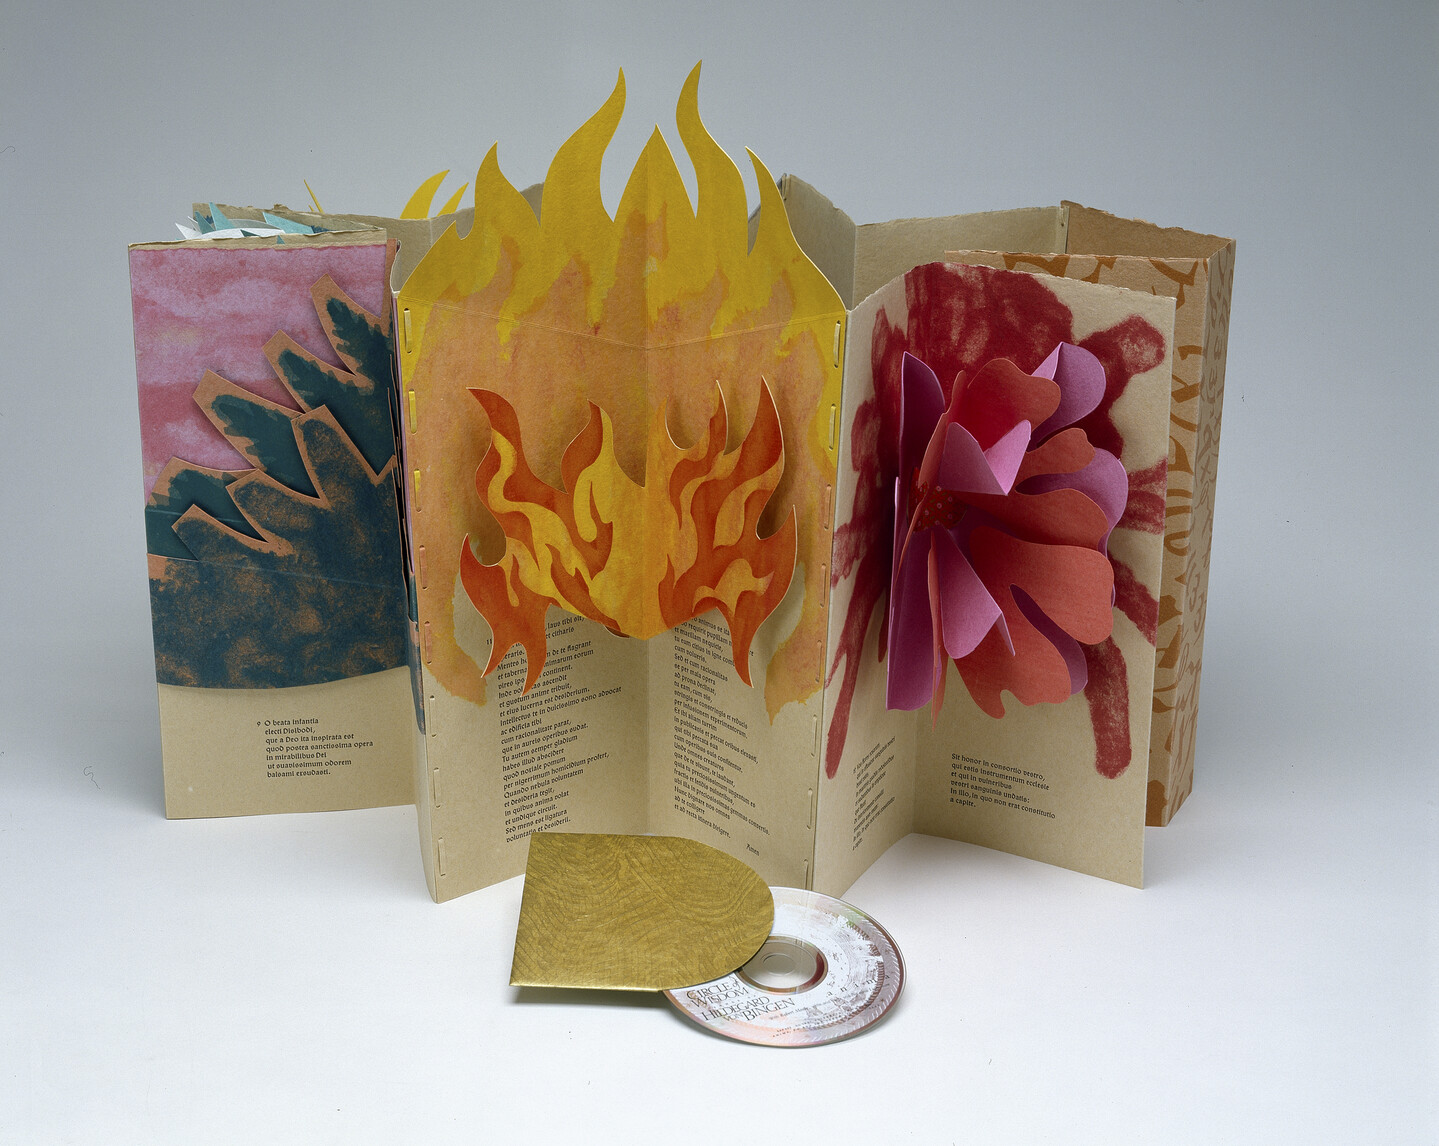 An accordion-style pop-up book made of paper displayed upright and open. The central portion has flames made of paper that extend beyond the top edge of the book. In front of the book there is a CD coming out of its golden holding case.